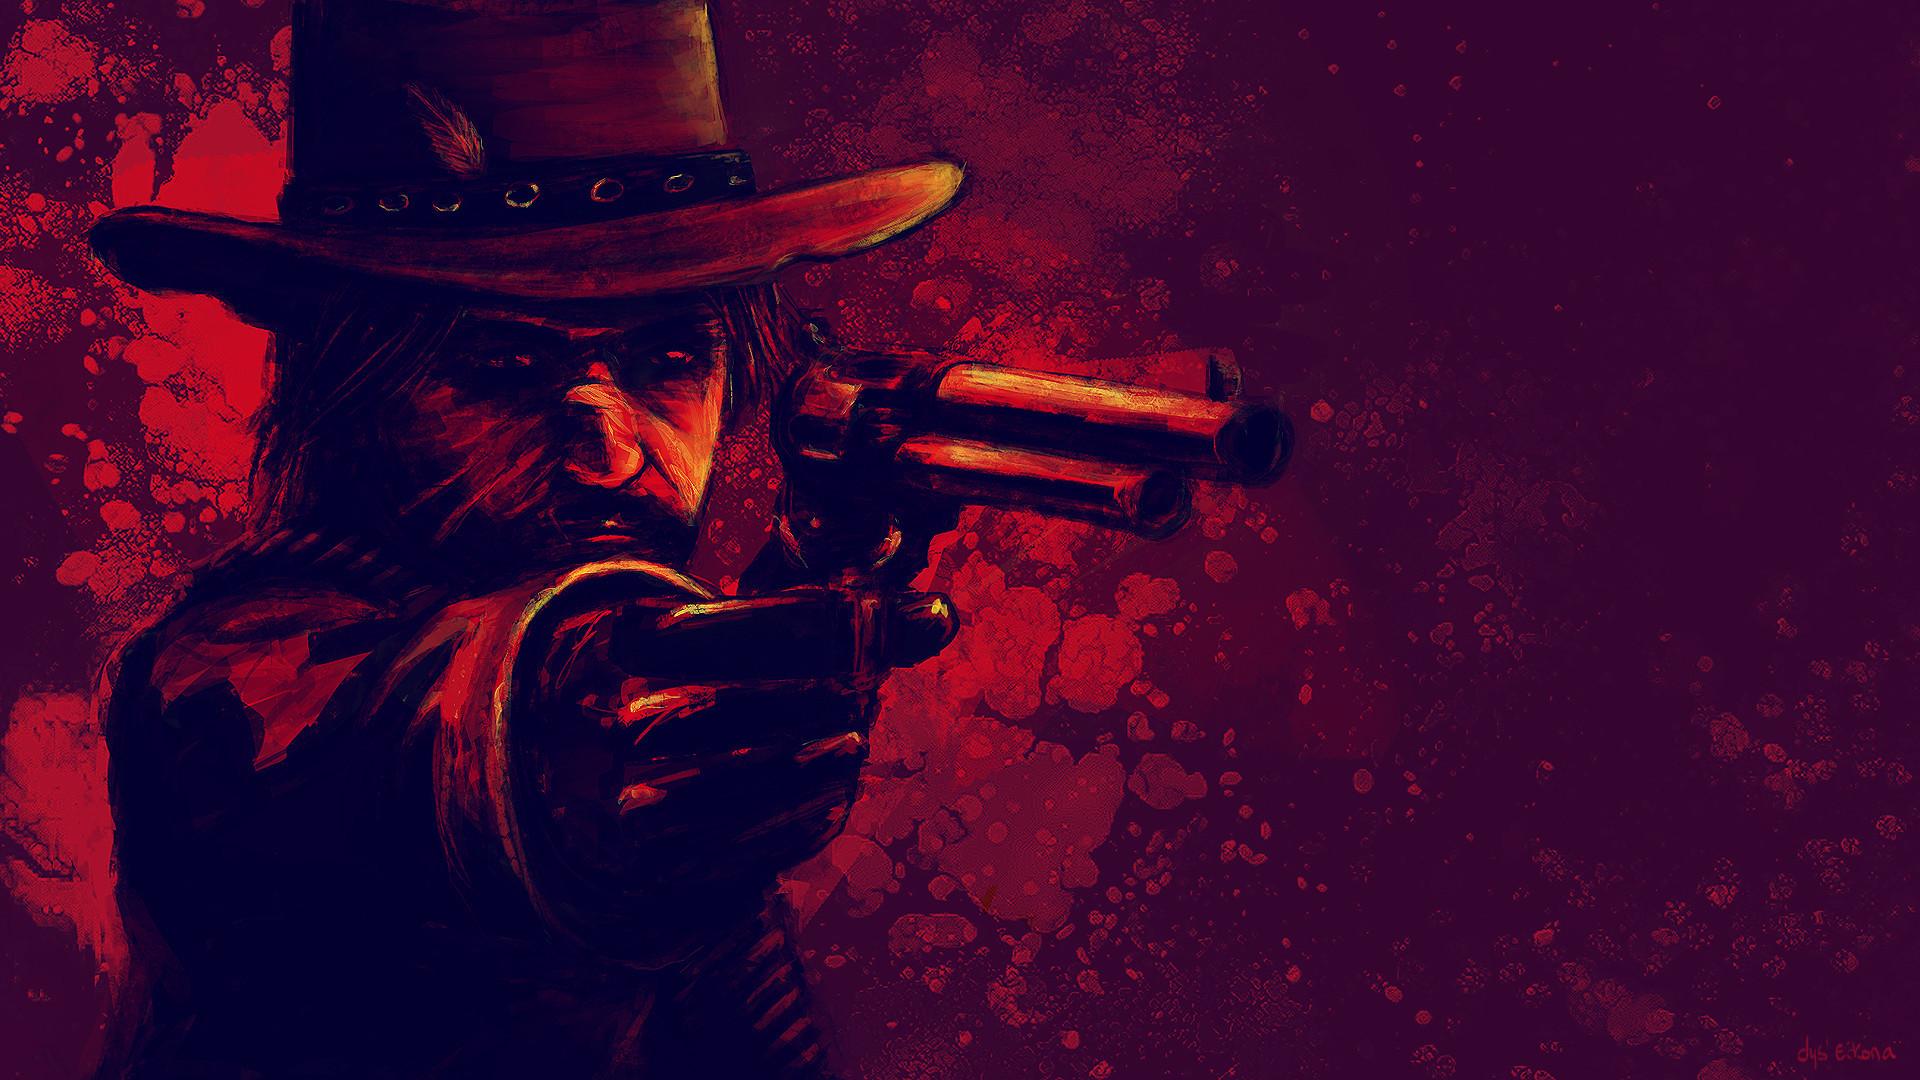 Red Dead Redemption 2 Cover Wallpaper,HD Games Wallpapers,4k